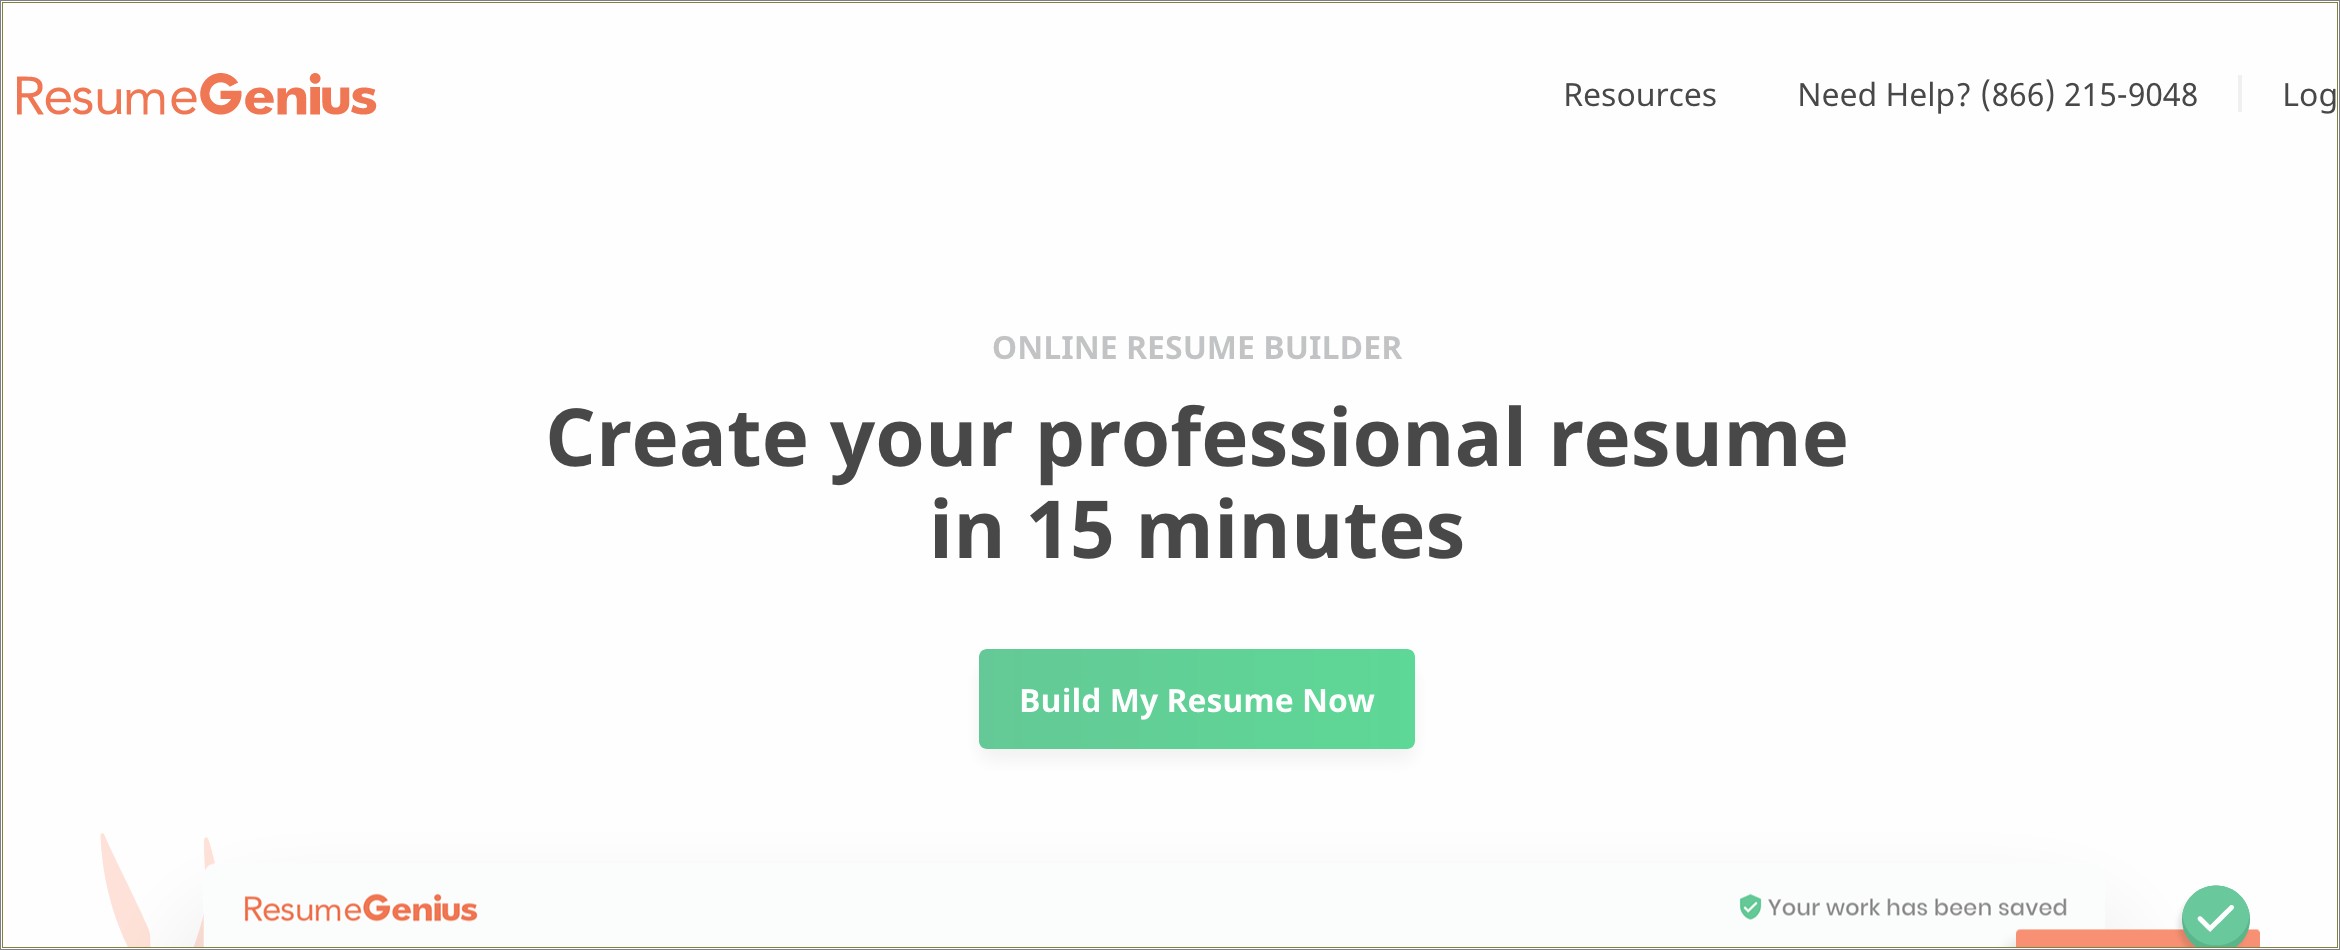 Where To Find Resume Genius Templates